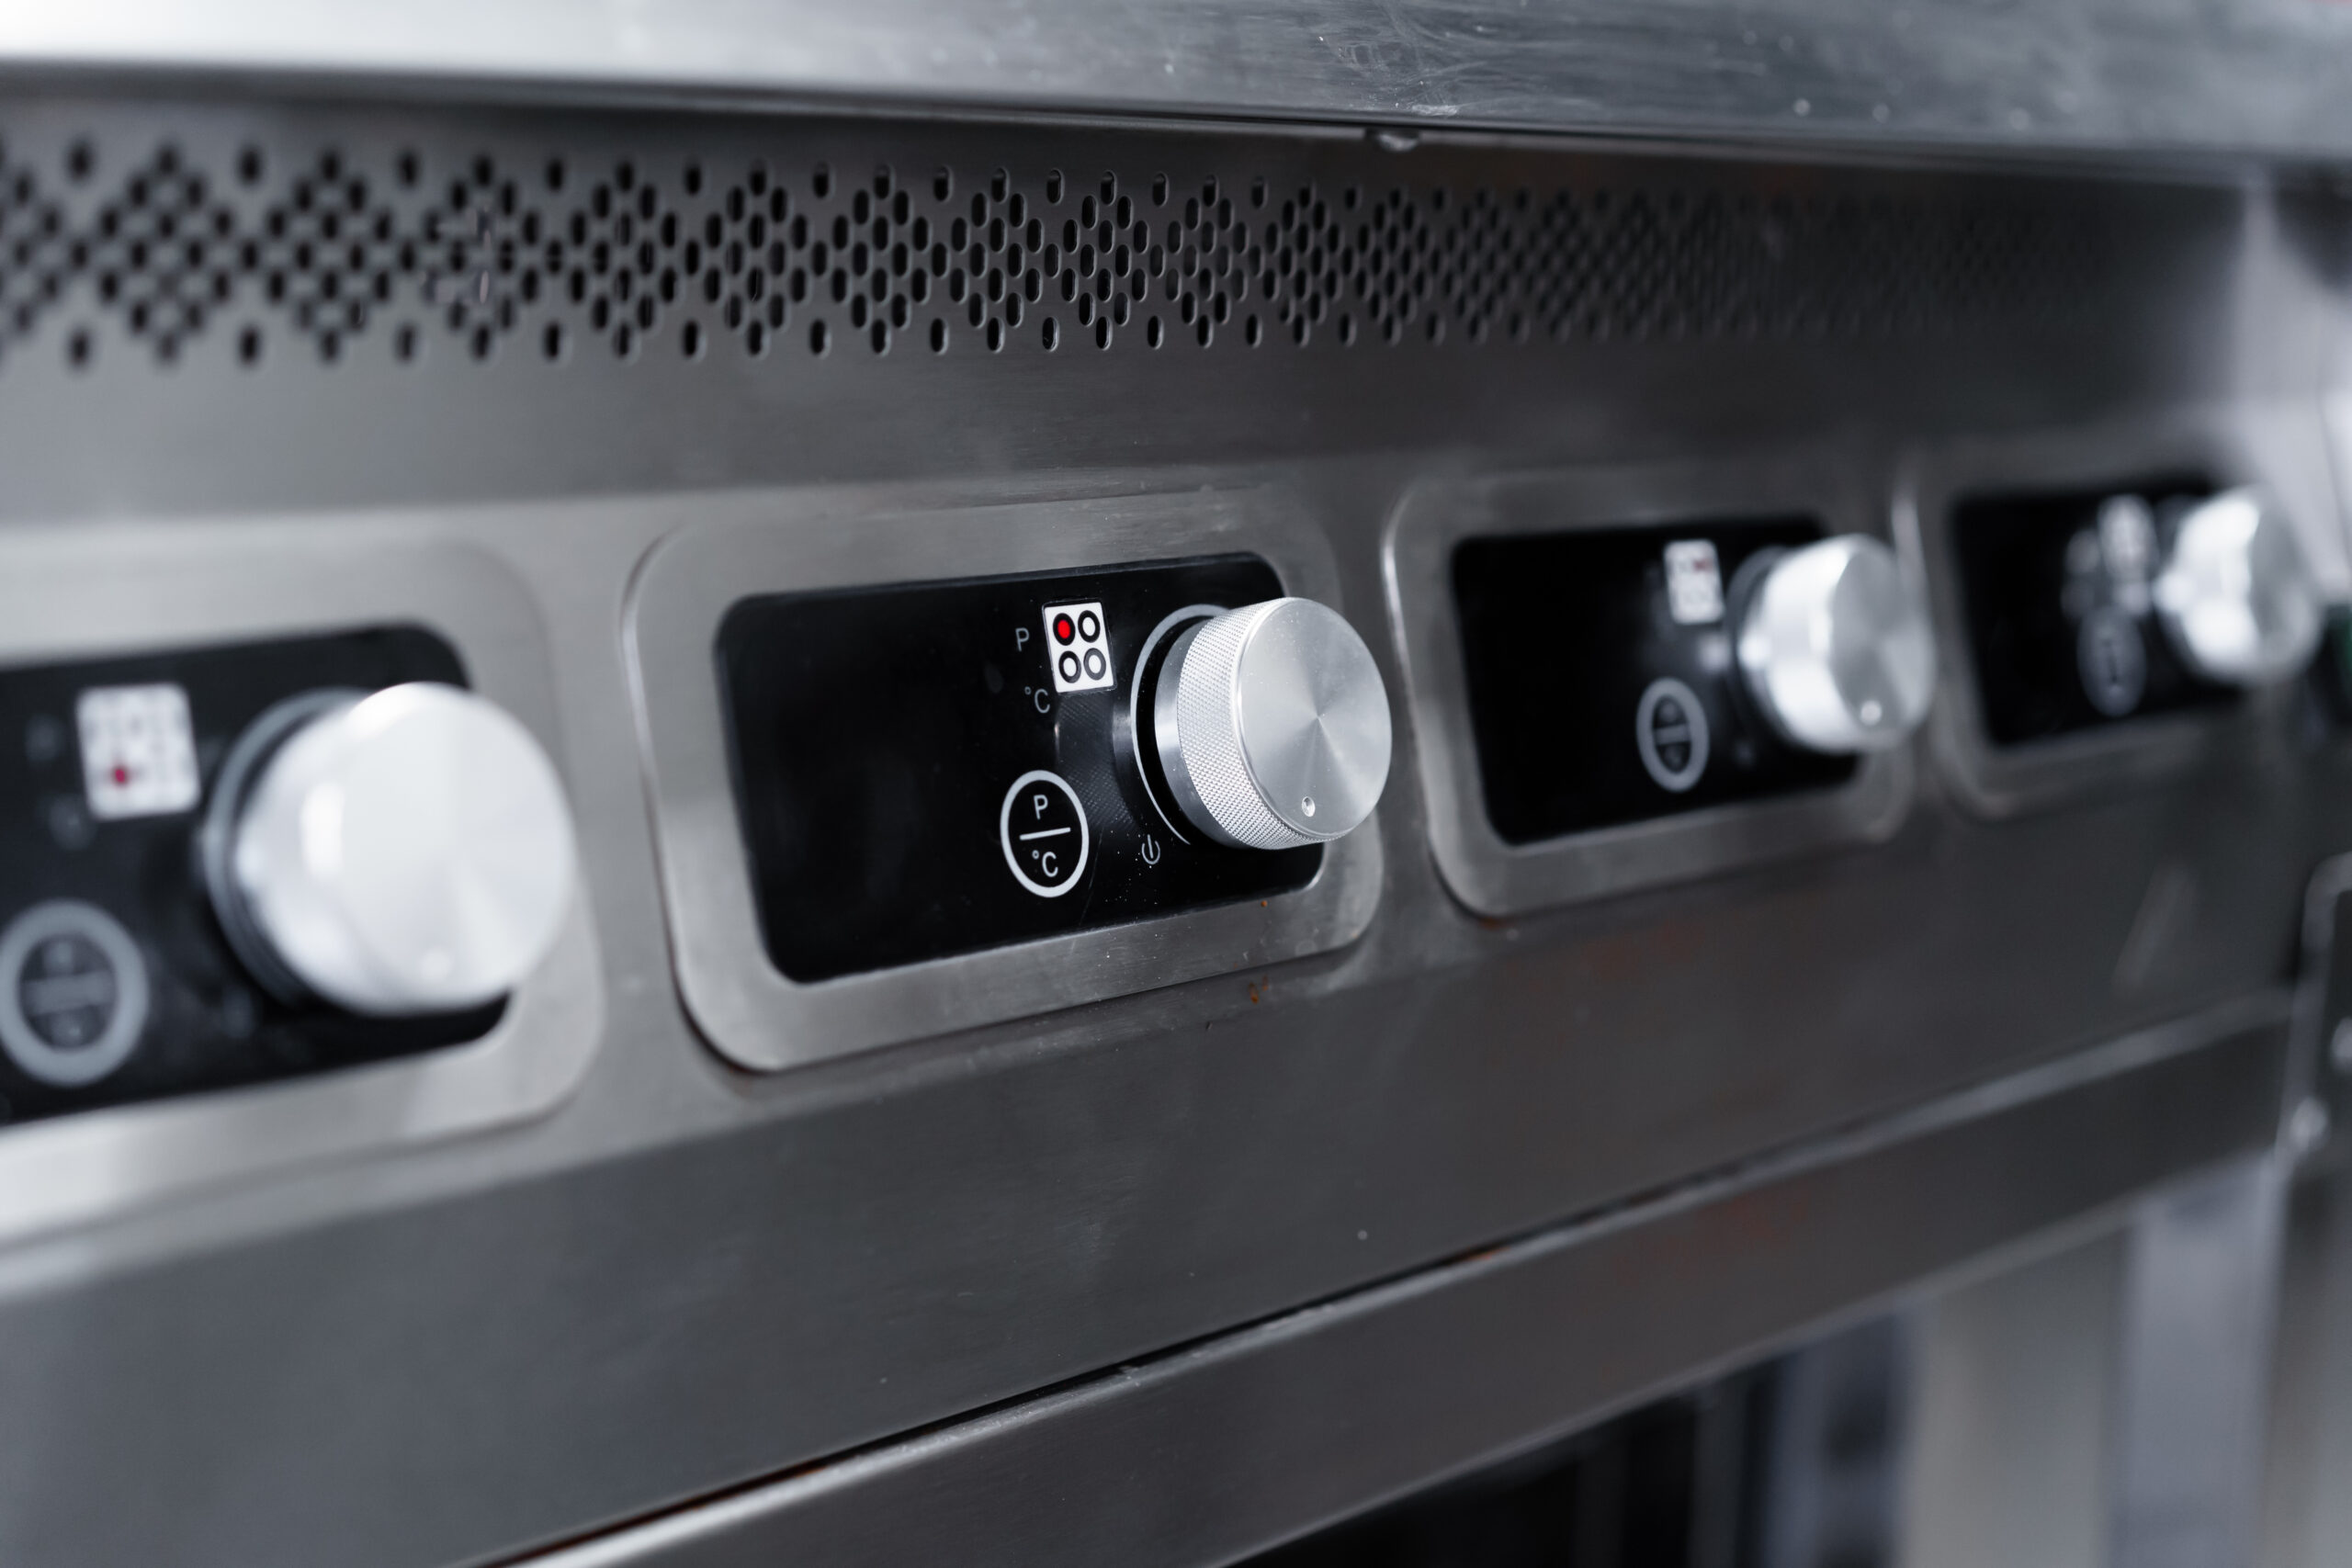 A closeup of the temperature control knobs of a commercial cooking appliance.